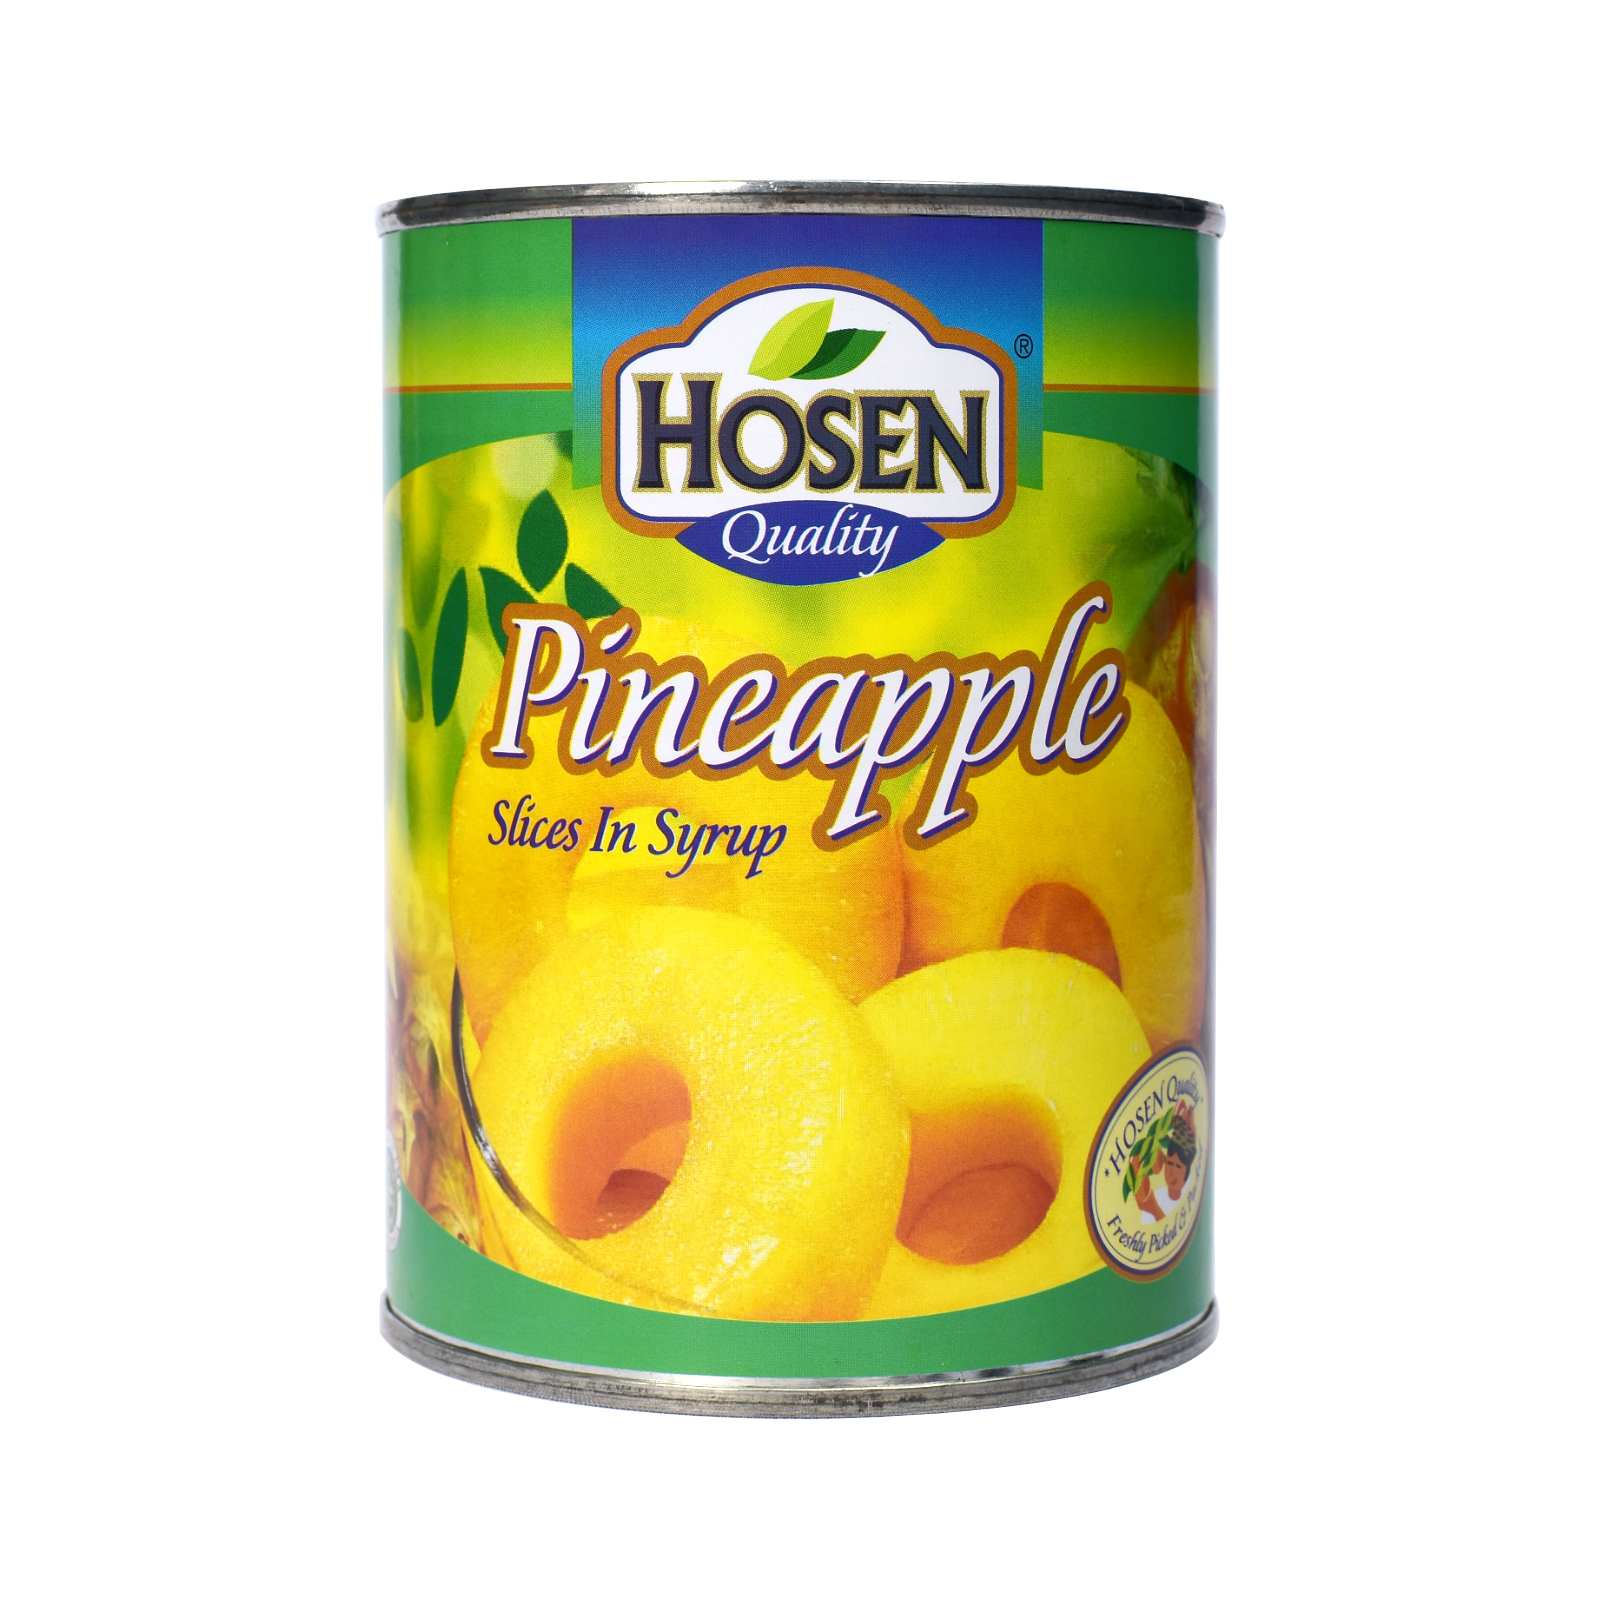 Hosen Pineapple Slices In Syrup.png